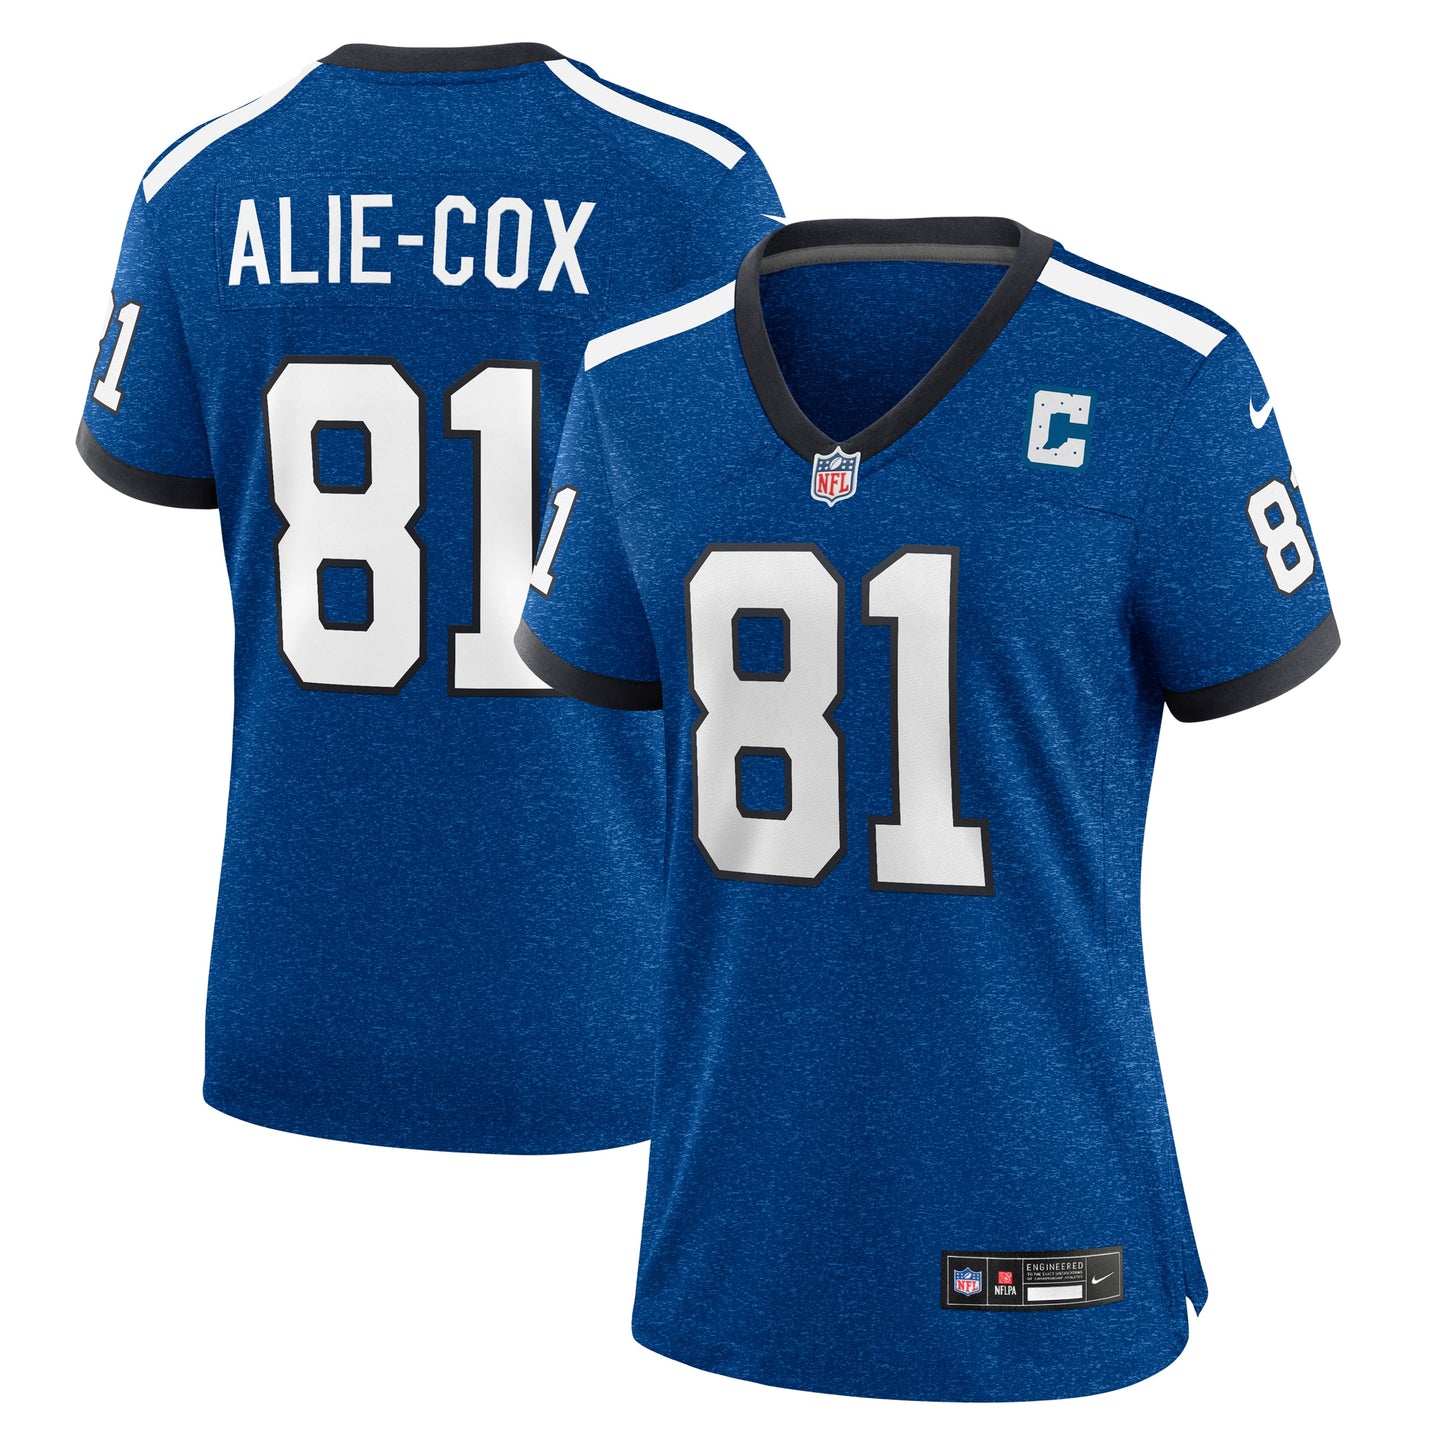 Mo Alie Cox Indianapolis Colts Nike Women's Indiana Nights Alternate Game Jersey - Royal